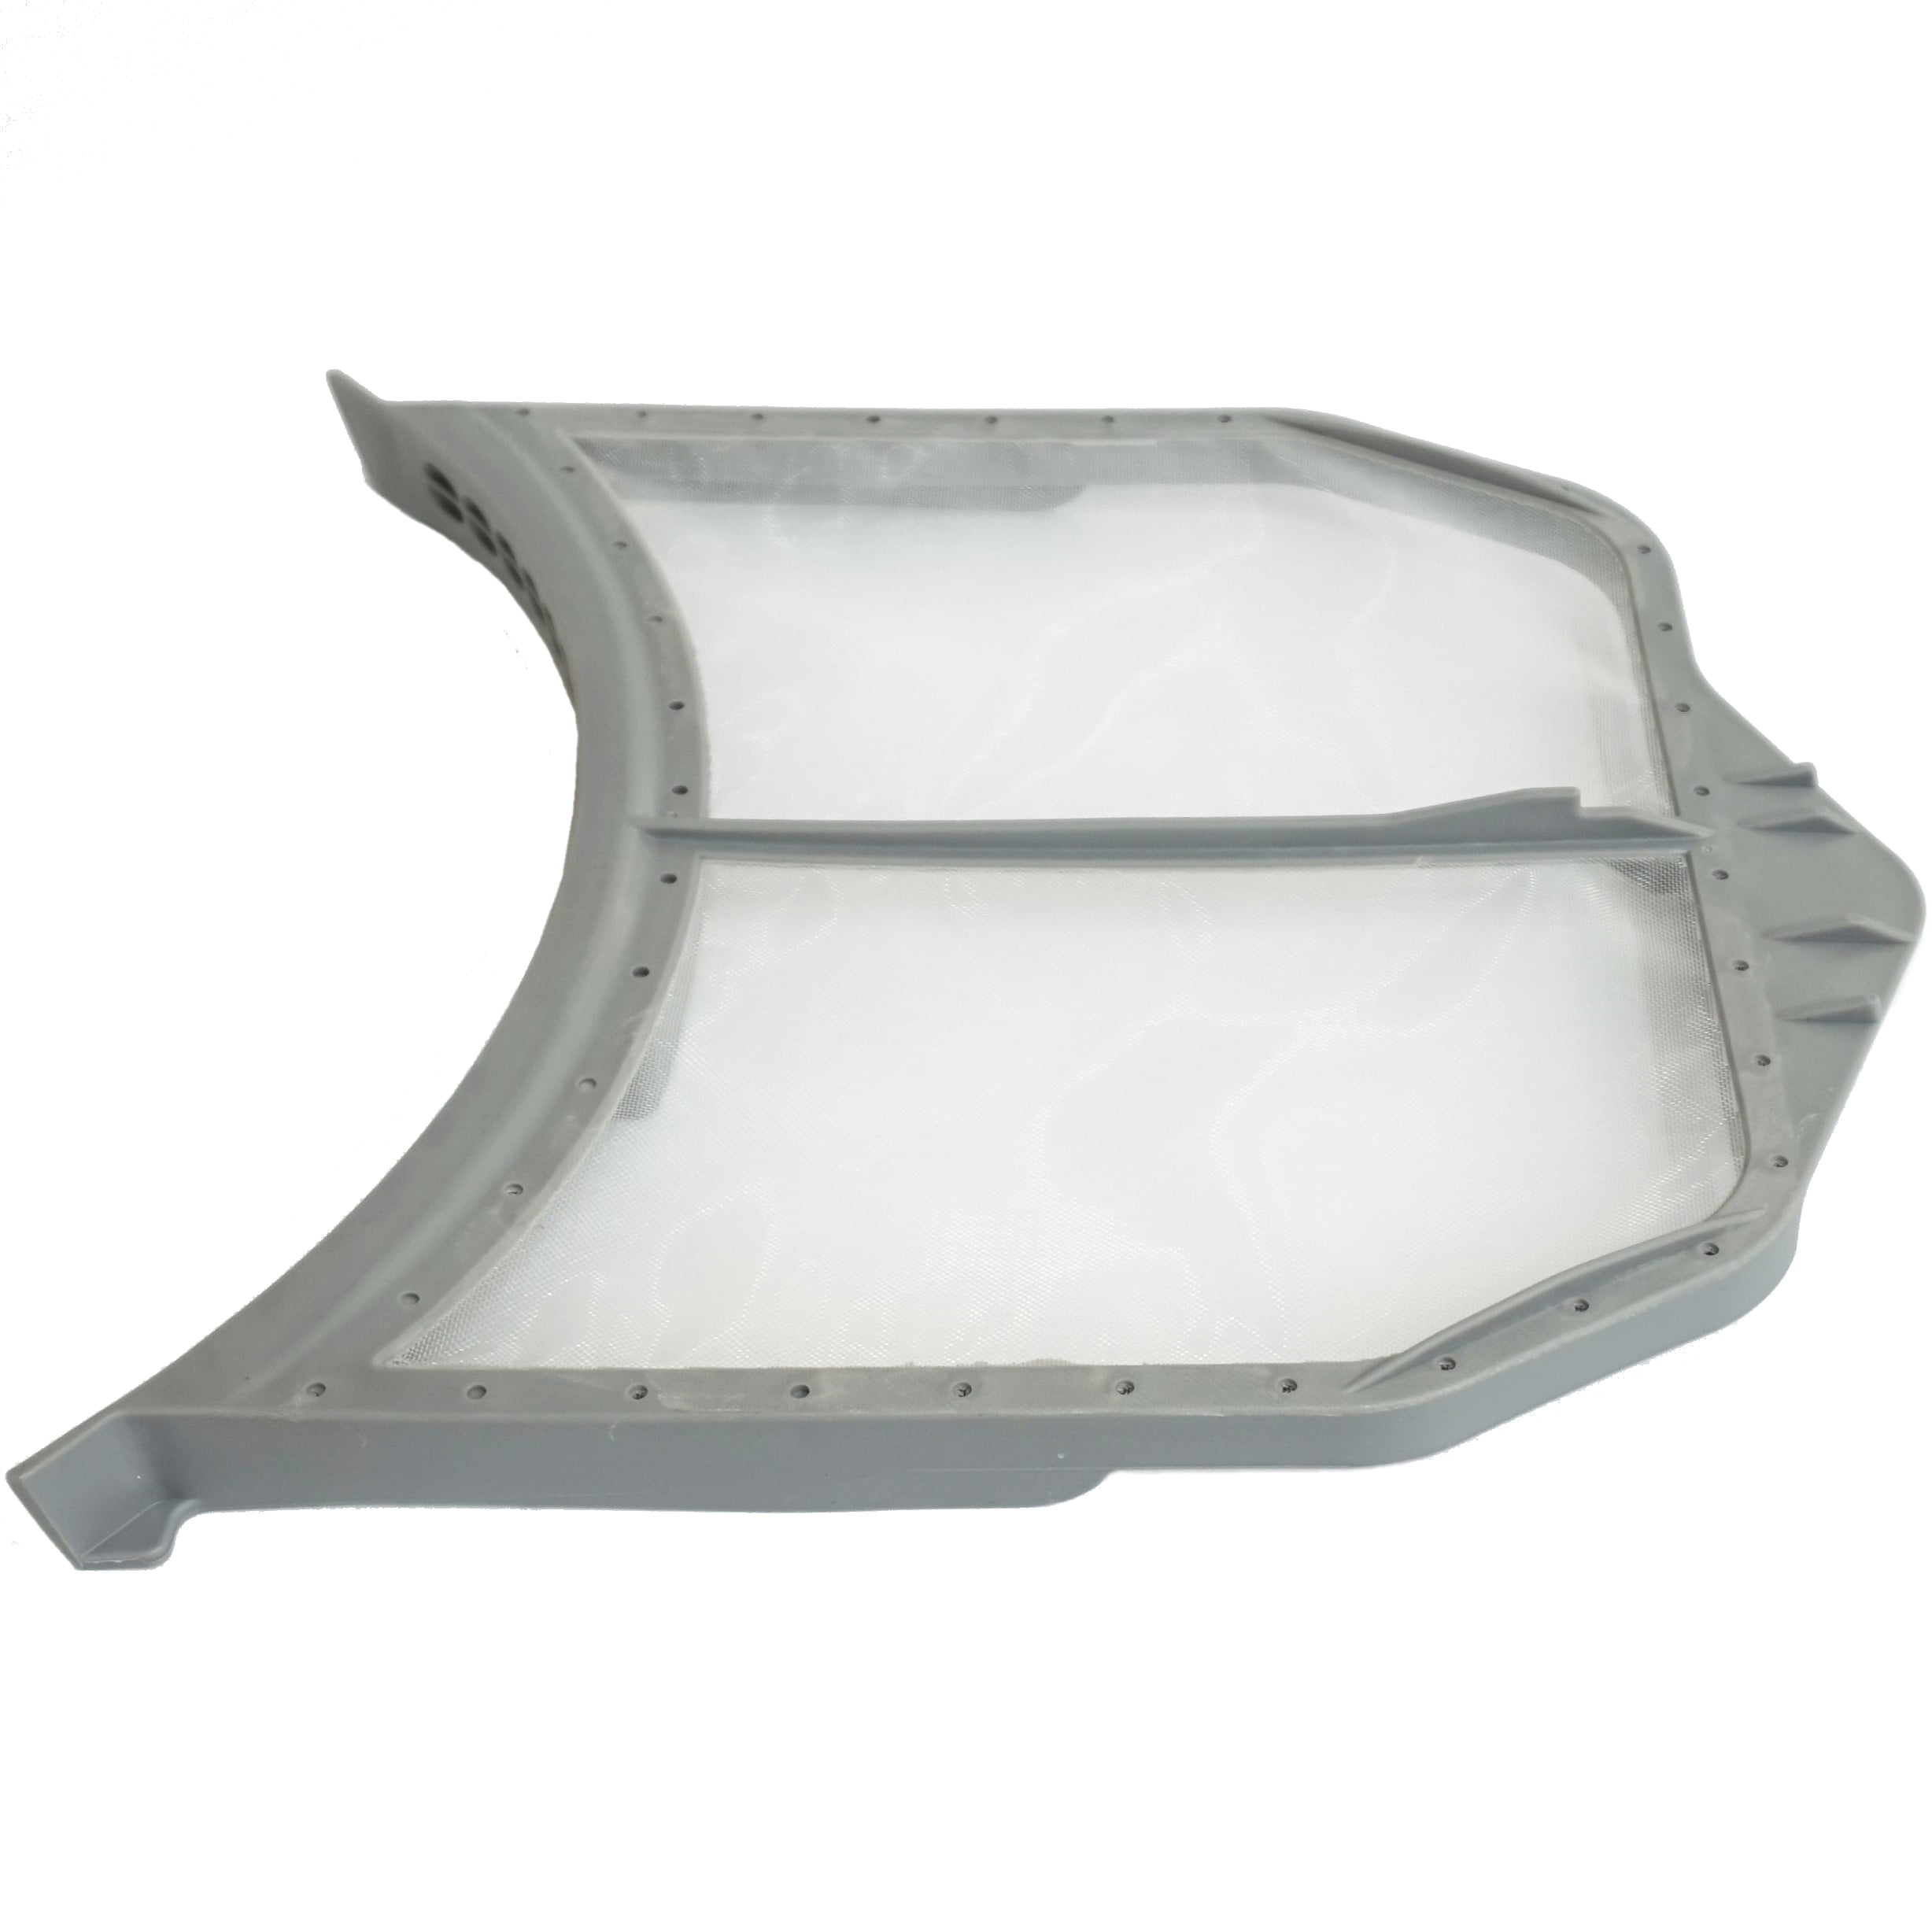 W10516085 for Whirlpool Dryer Lint Filter Screen